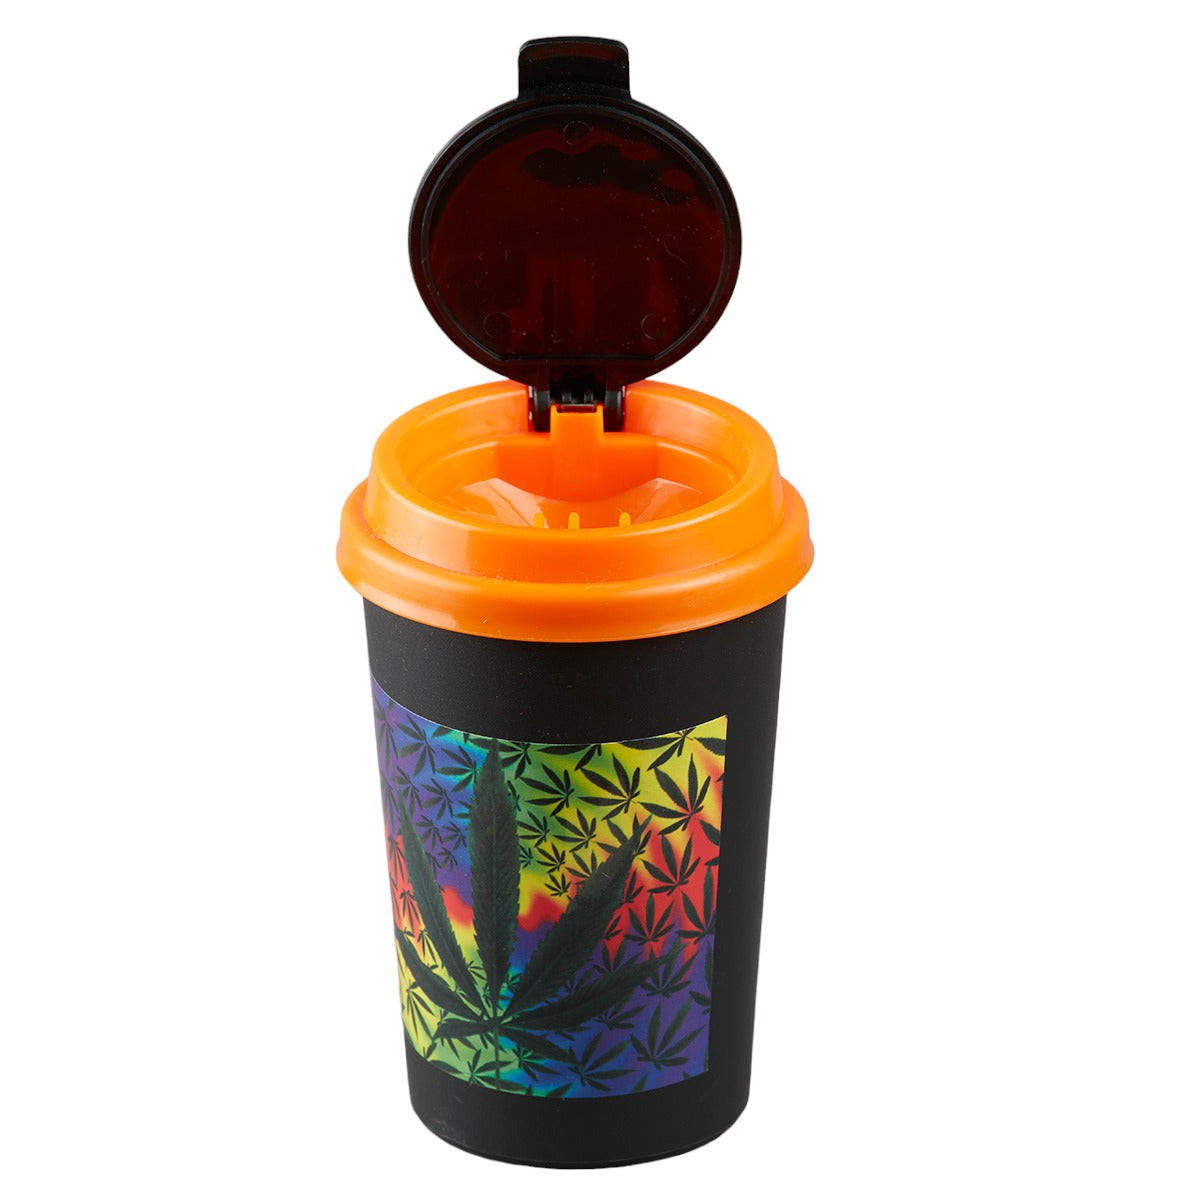 Plastic Car Ashtray Bucket with Lid for Smokers (9794)